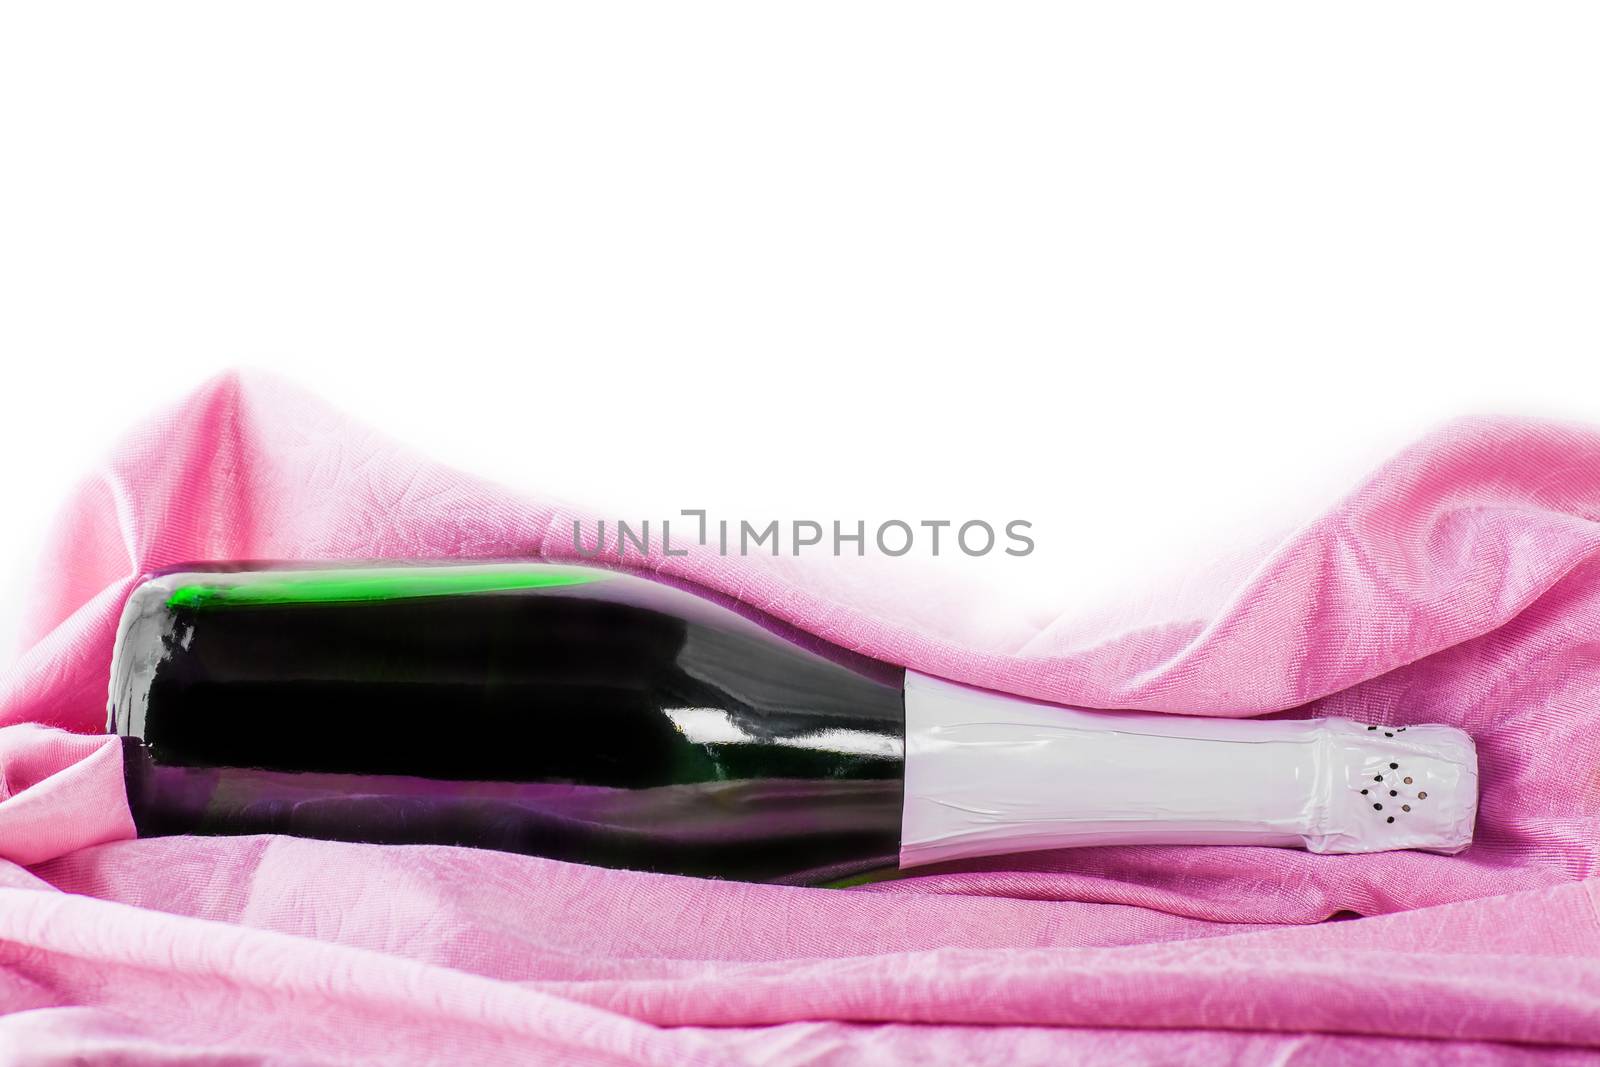  bottle of champagne wrapped in pink tissue